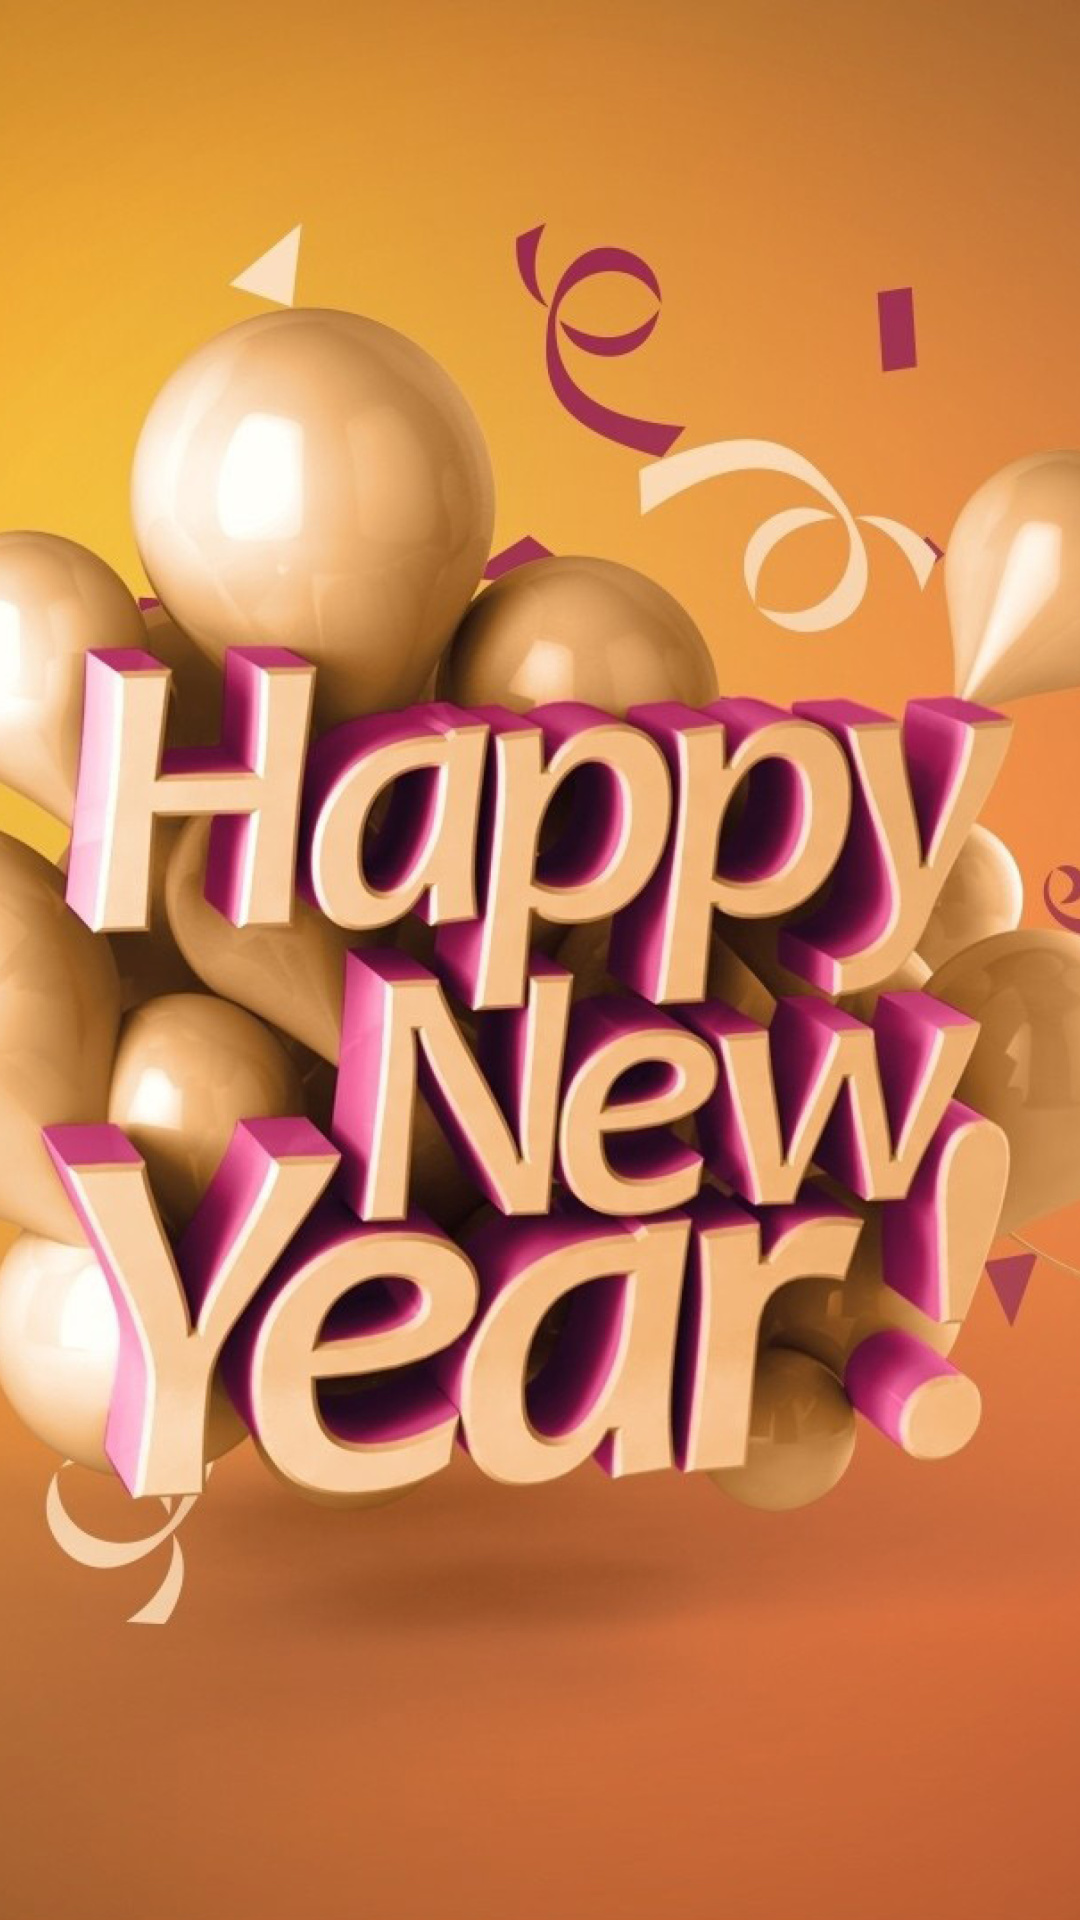 Happy New Year Good Luck Quote wallpaper 1080x1920